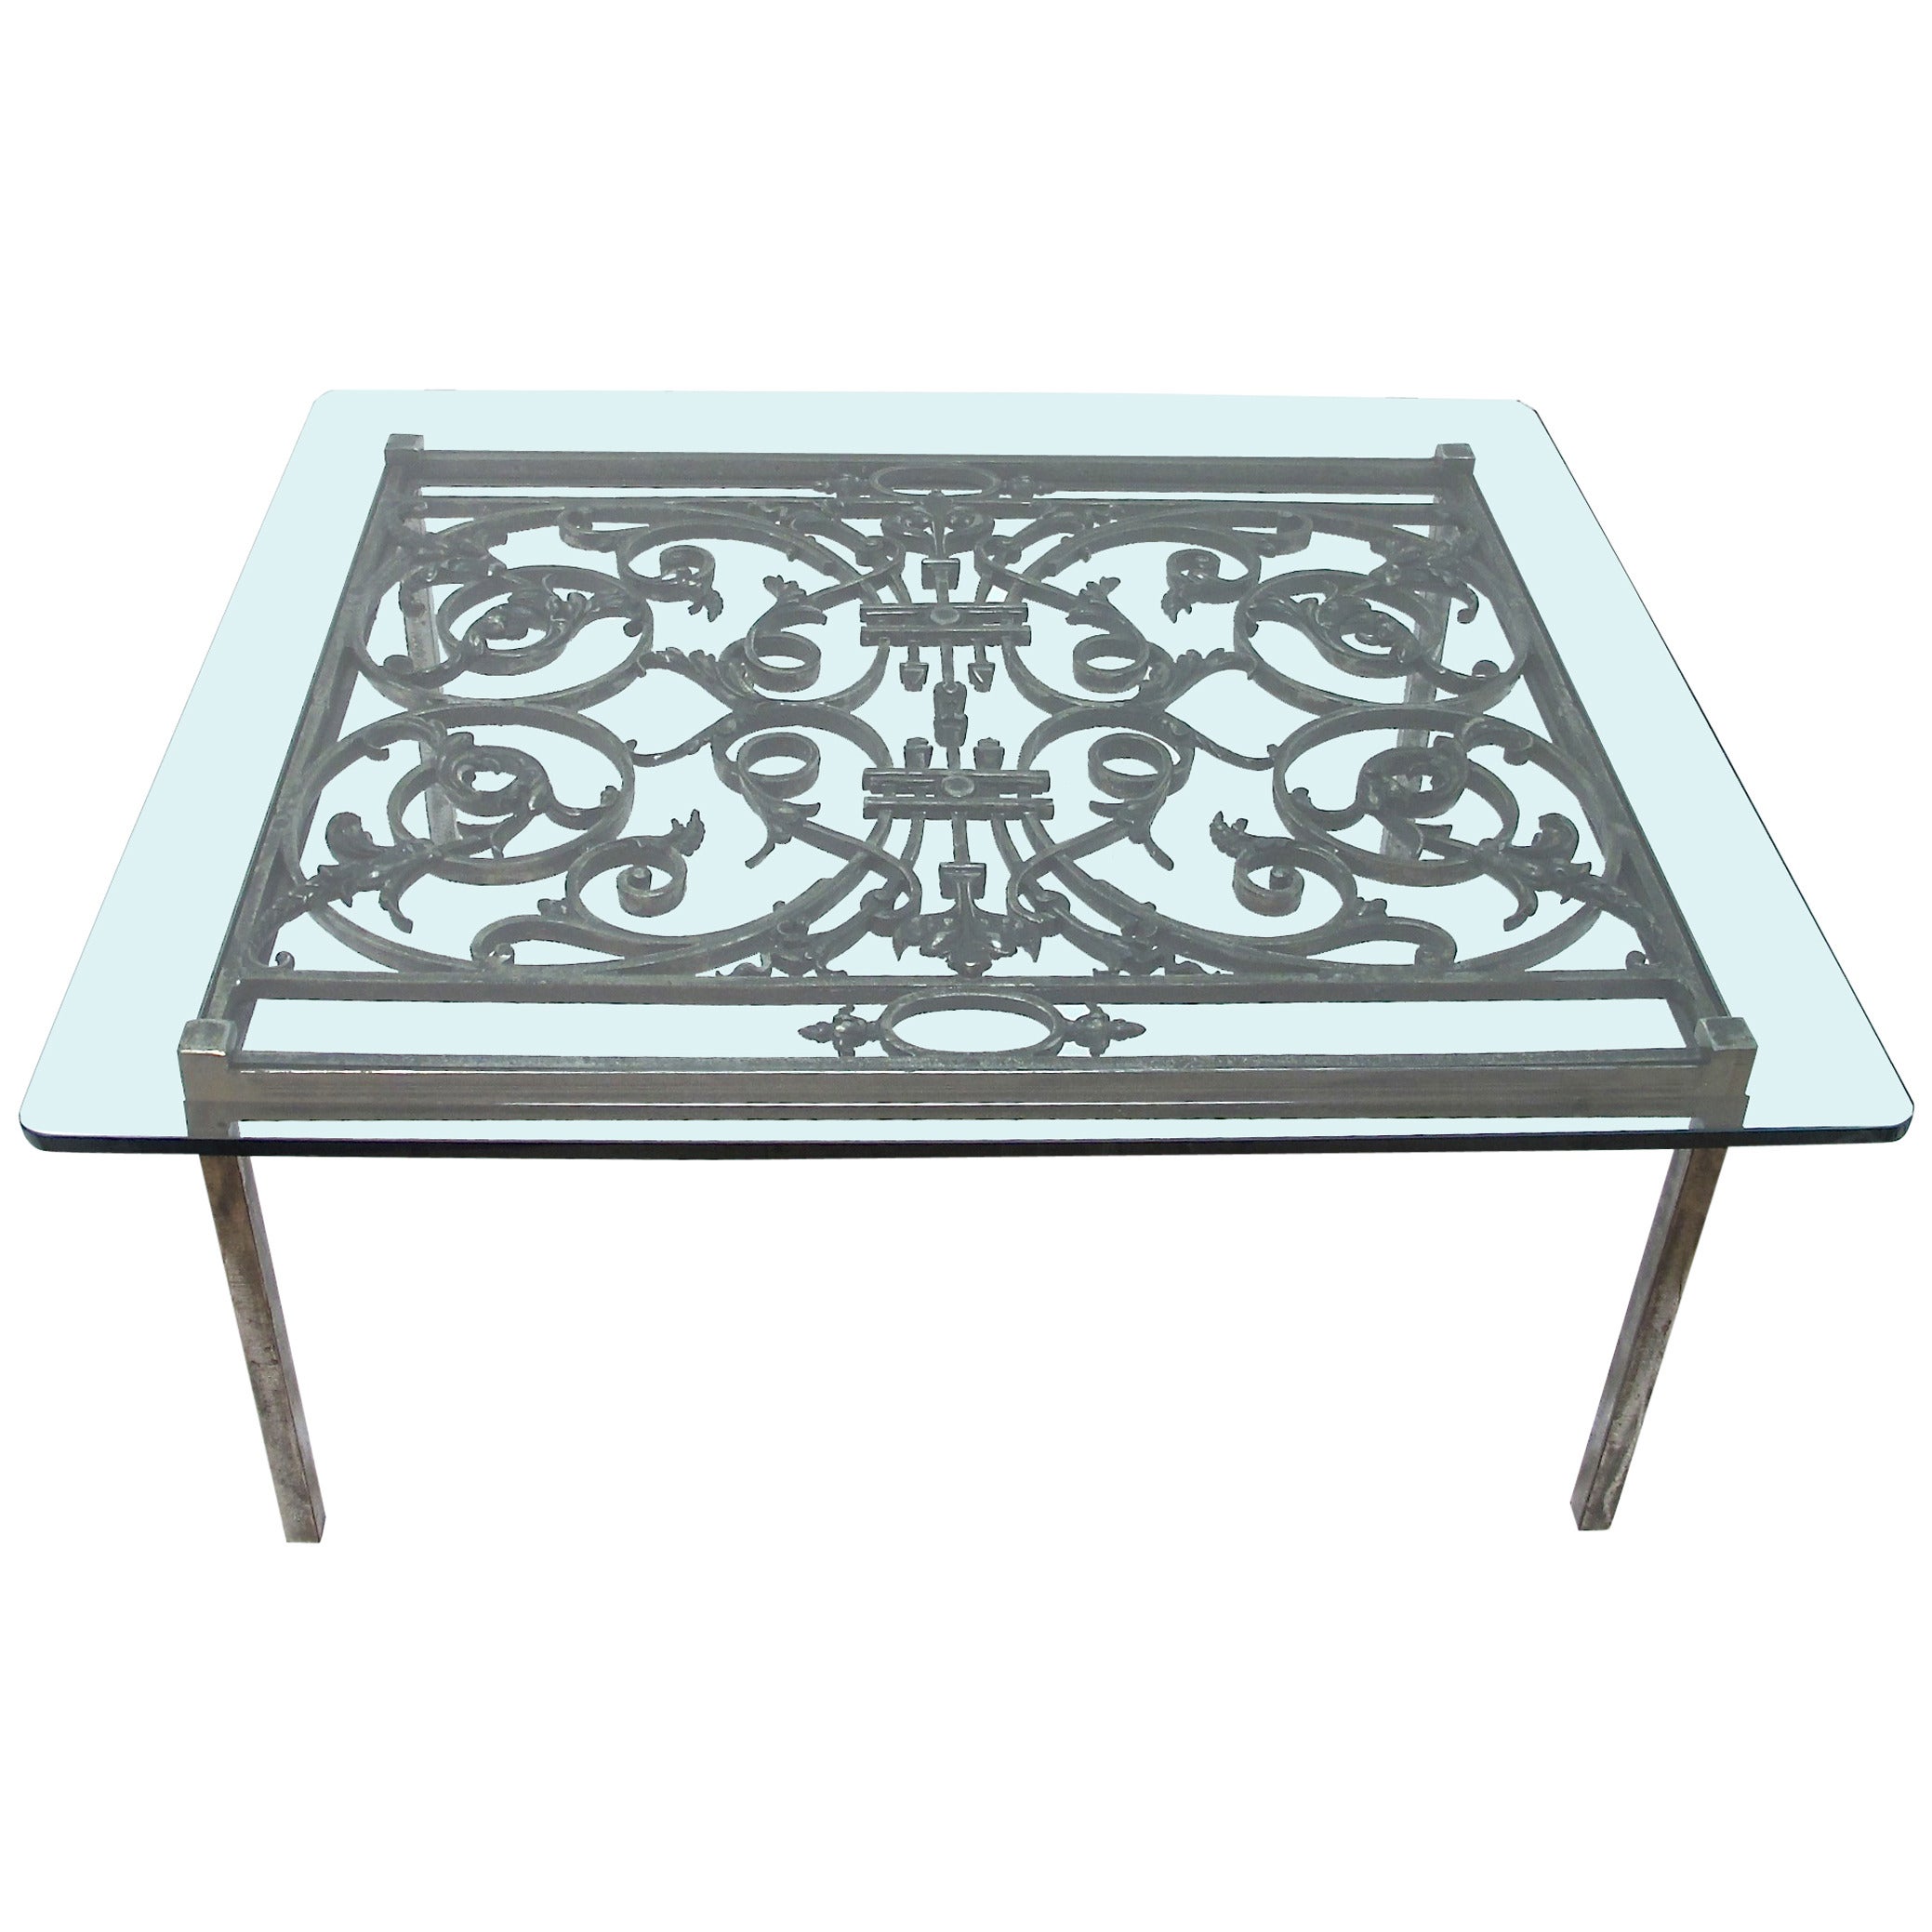 Polished Iron Grate Coffee Table, French 19th Century